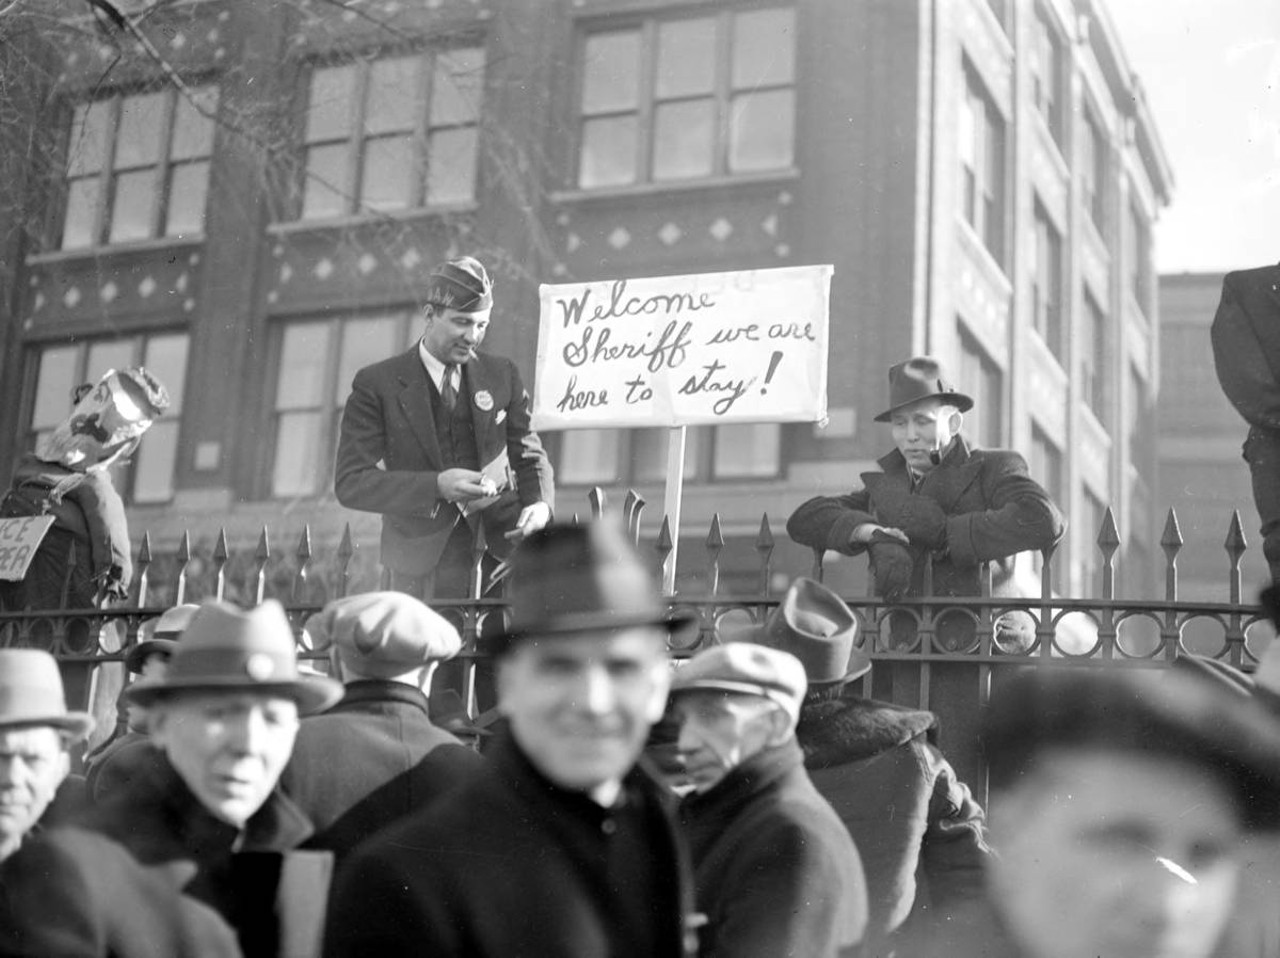 
March 17, 1937: Men gather outside the Dodge plant in Detroit during a sit-down strike. One man stands next to a picket sign that reads, "Welcome Sheriff, we are here to stay!"